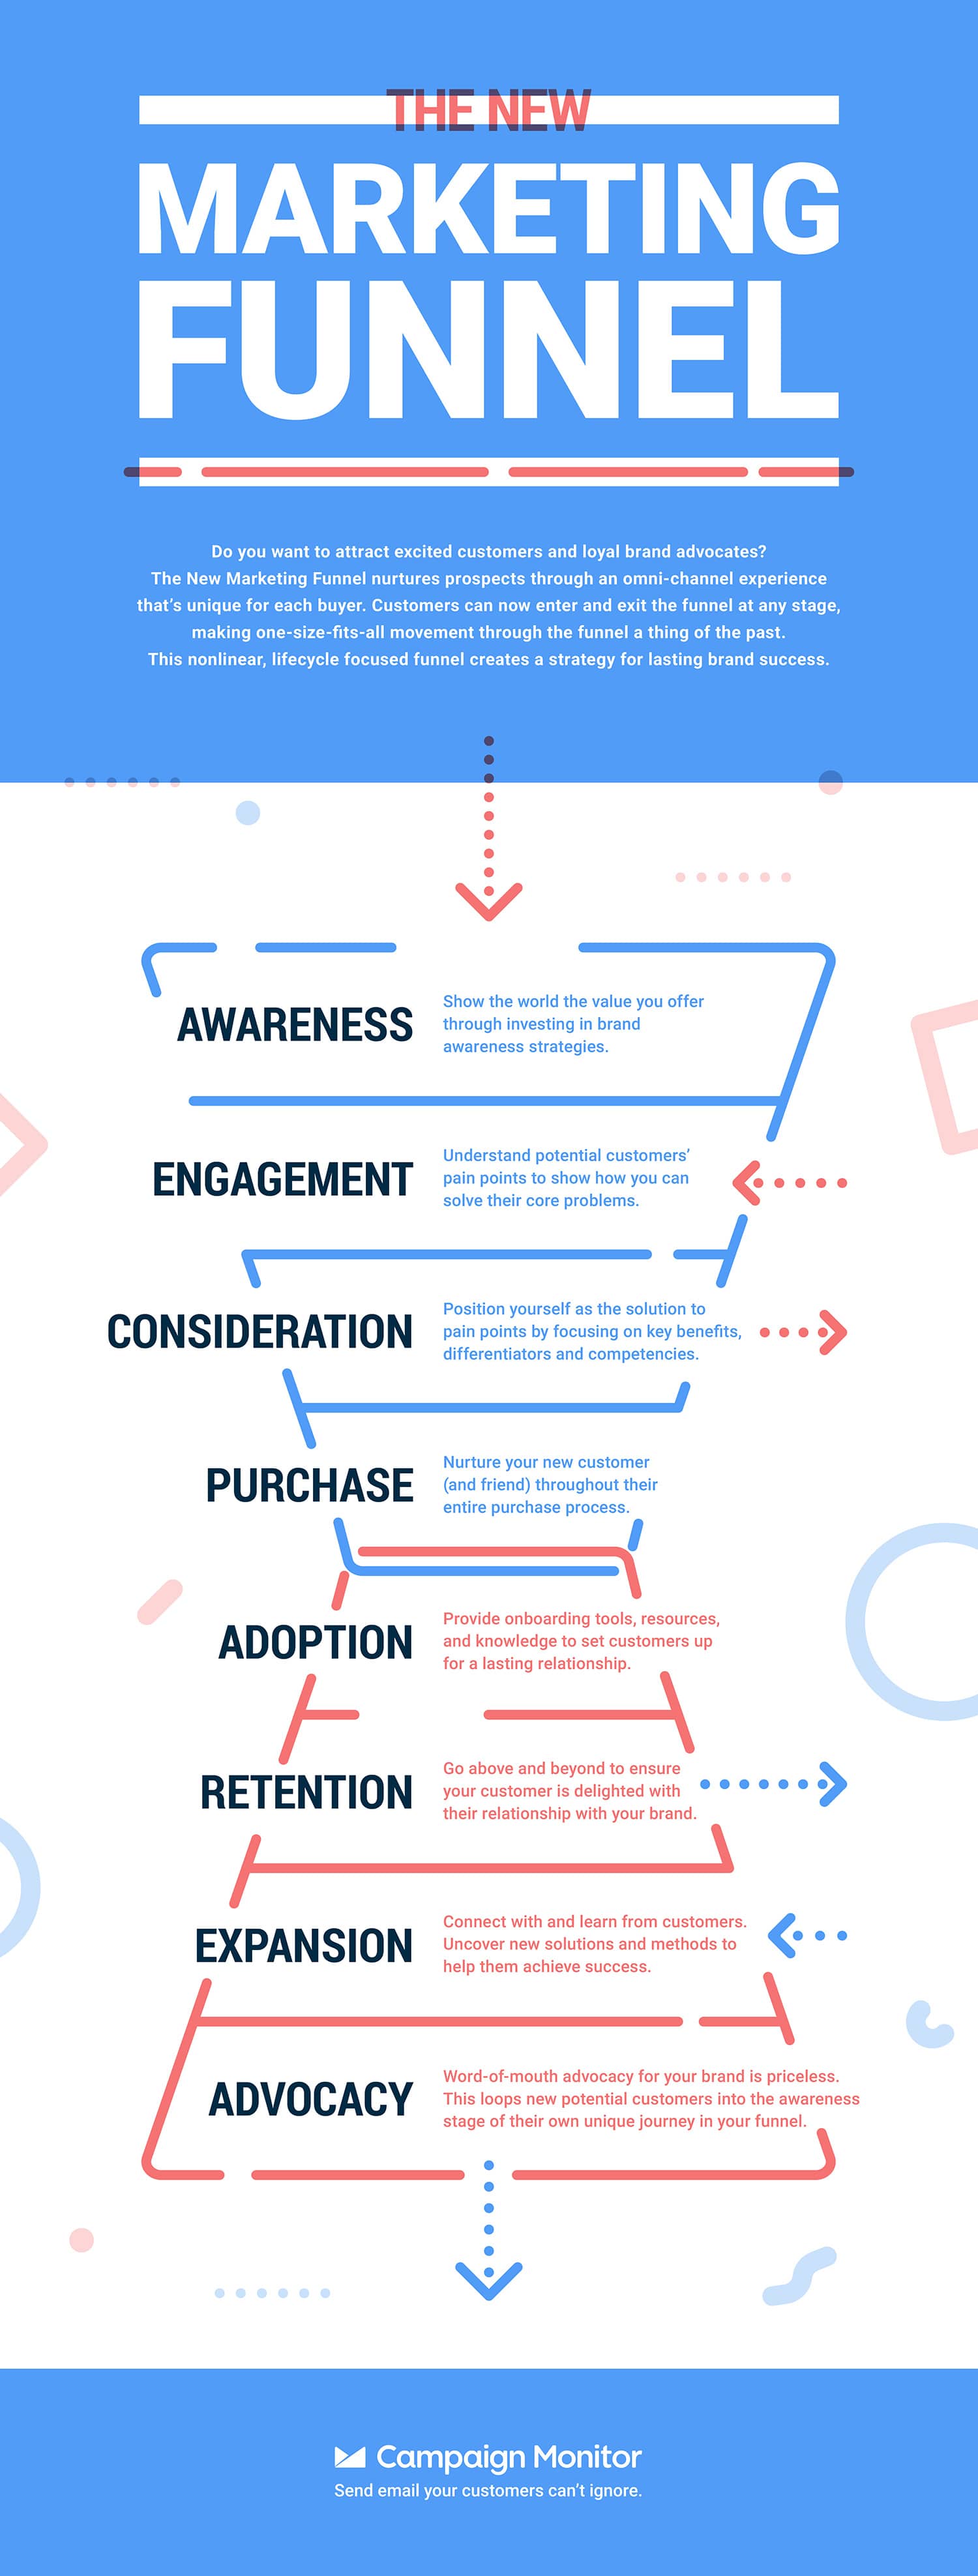 Now, if the idea of a funnel is still prominent for many marketing teams, another way to approach this loop is to visualize it as a double-ended funnel. 